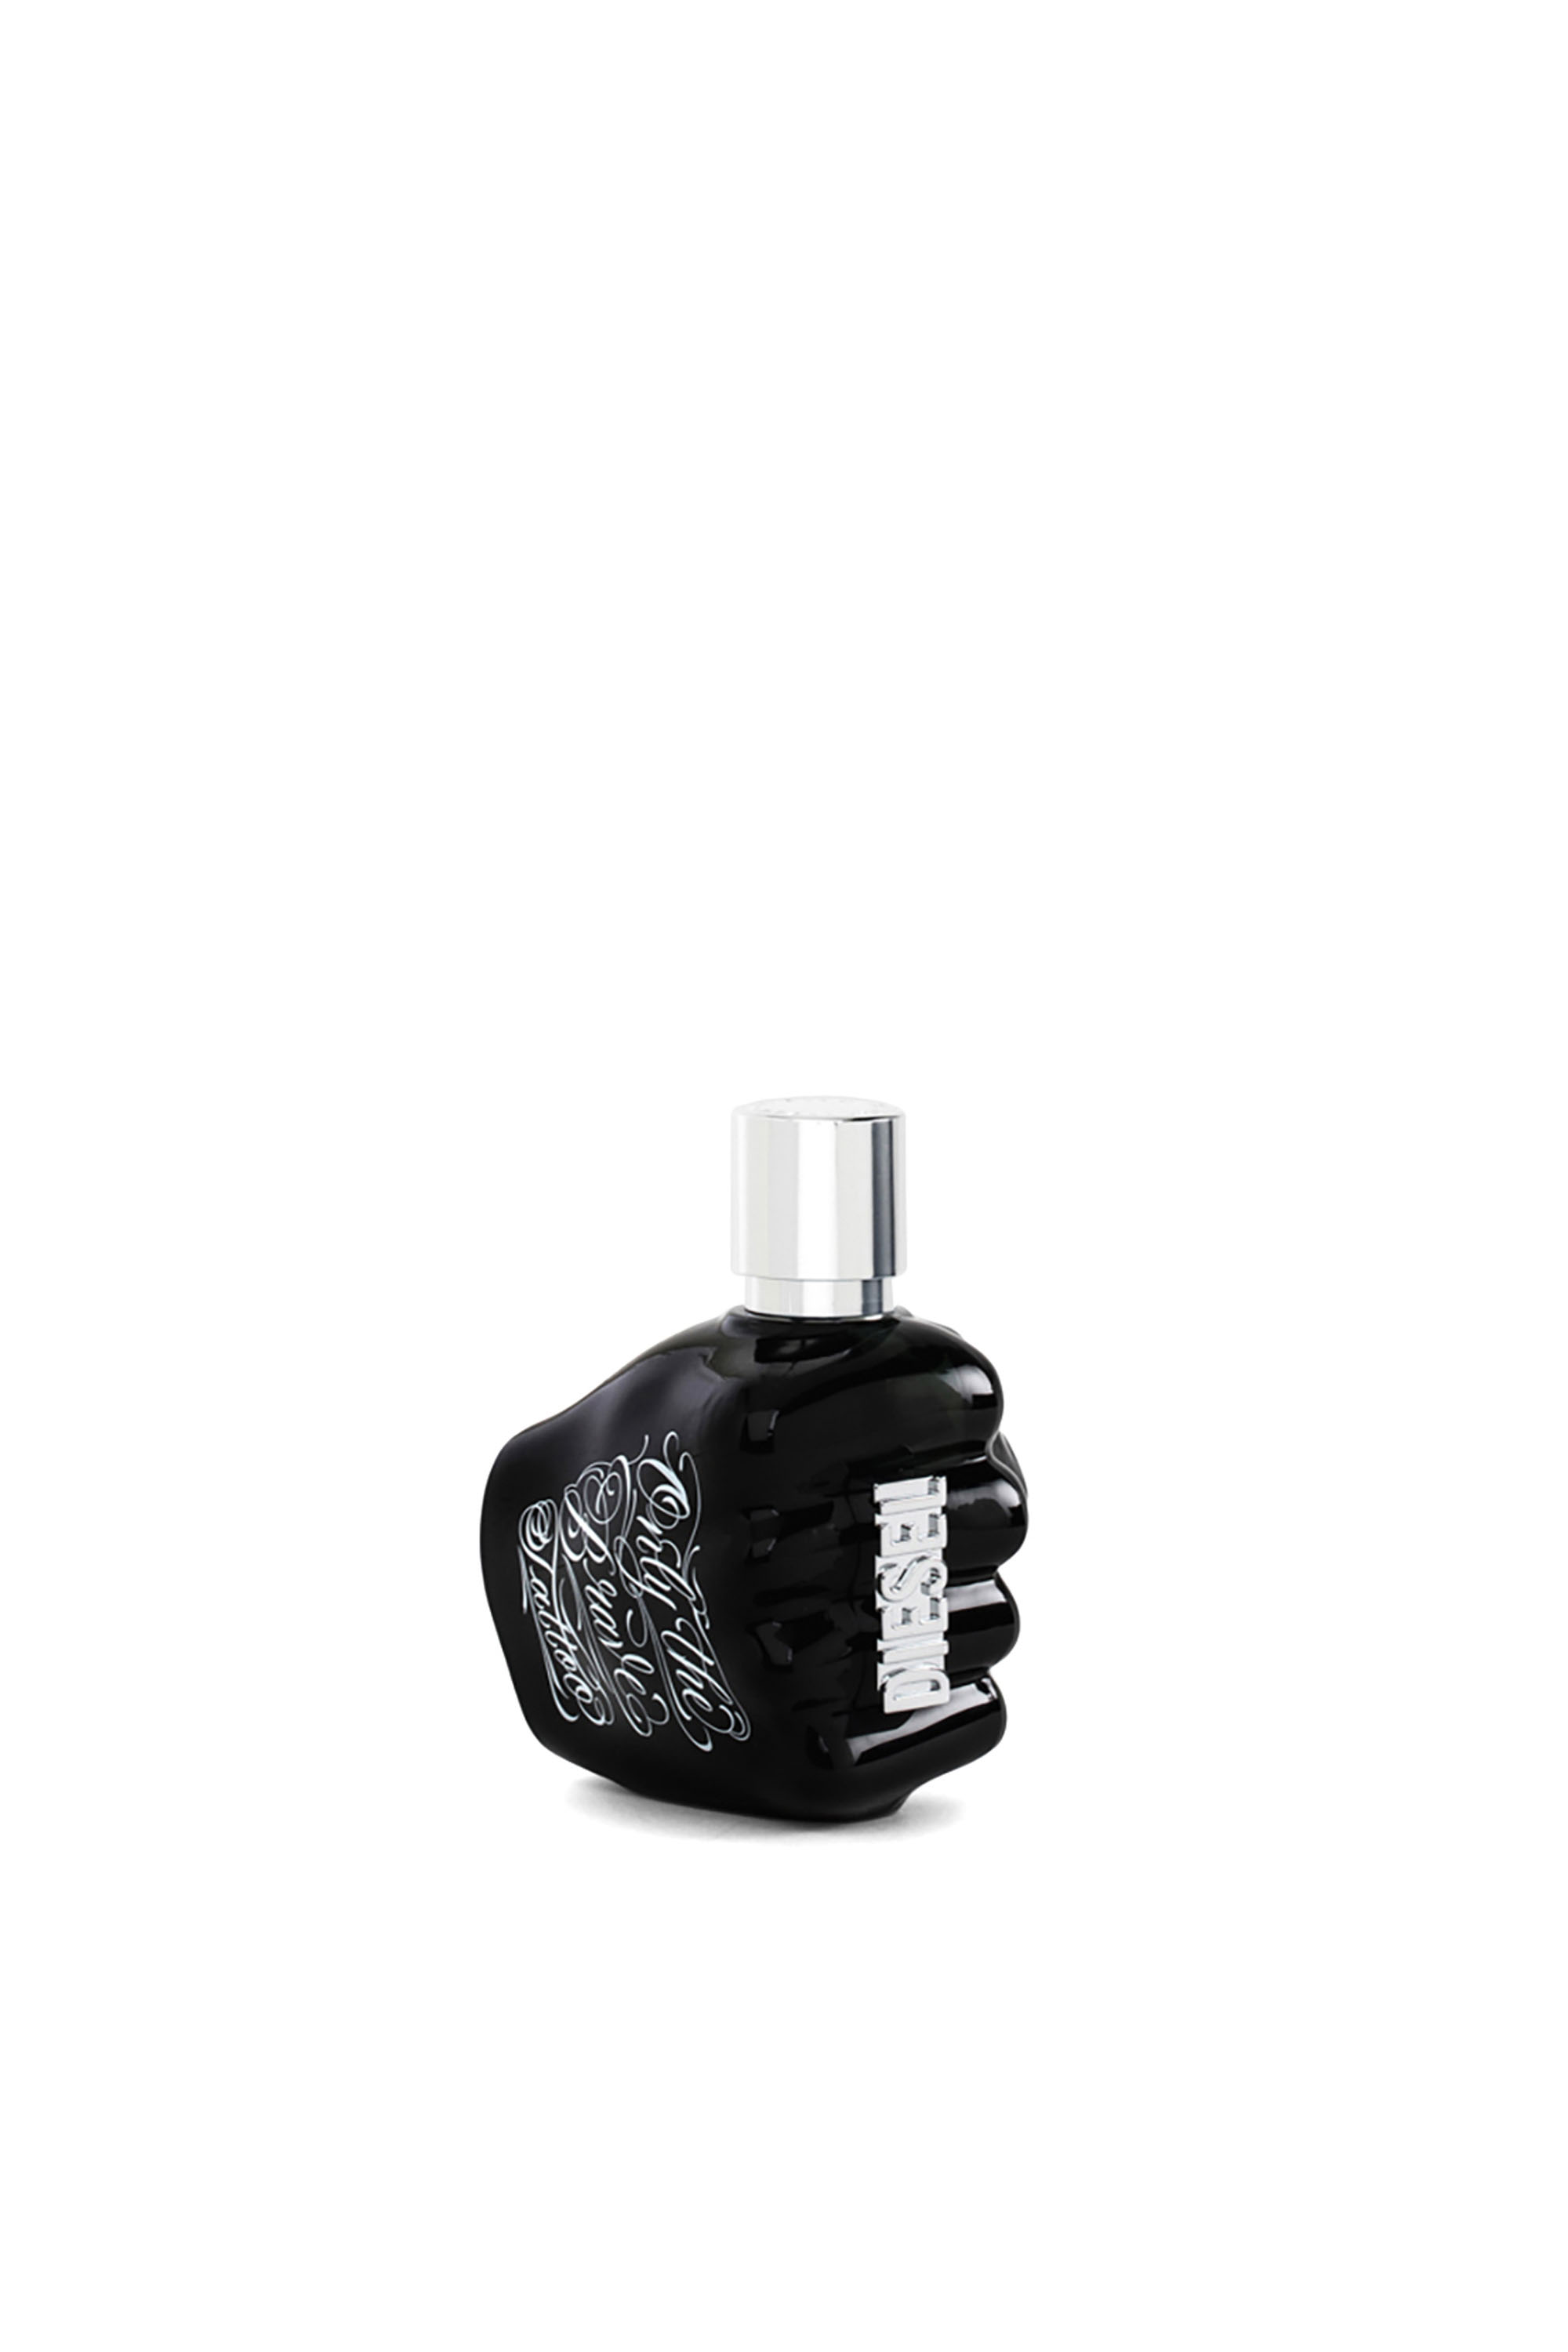 ONLY THE BRAVE TATTOO 50 ML